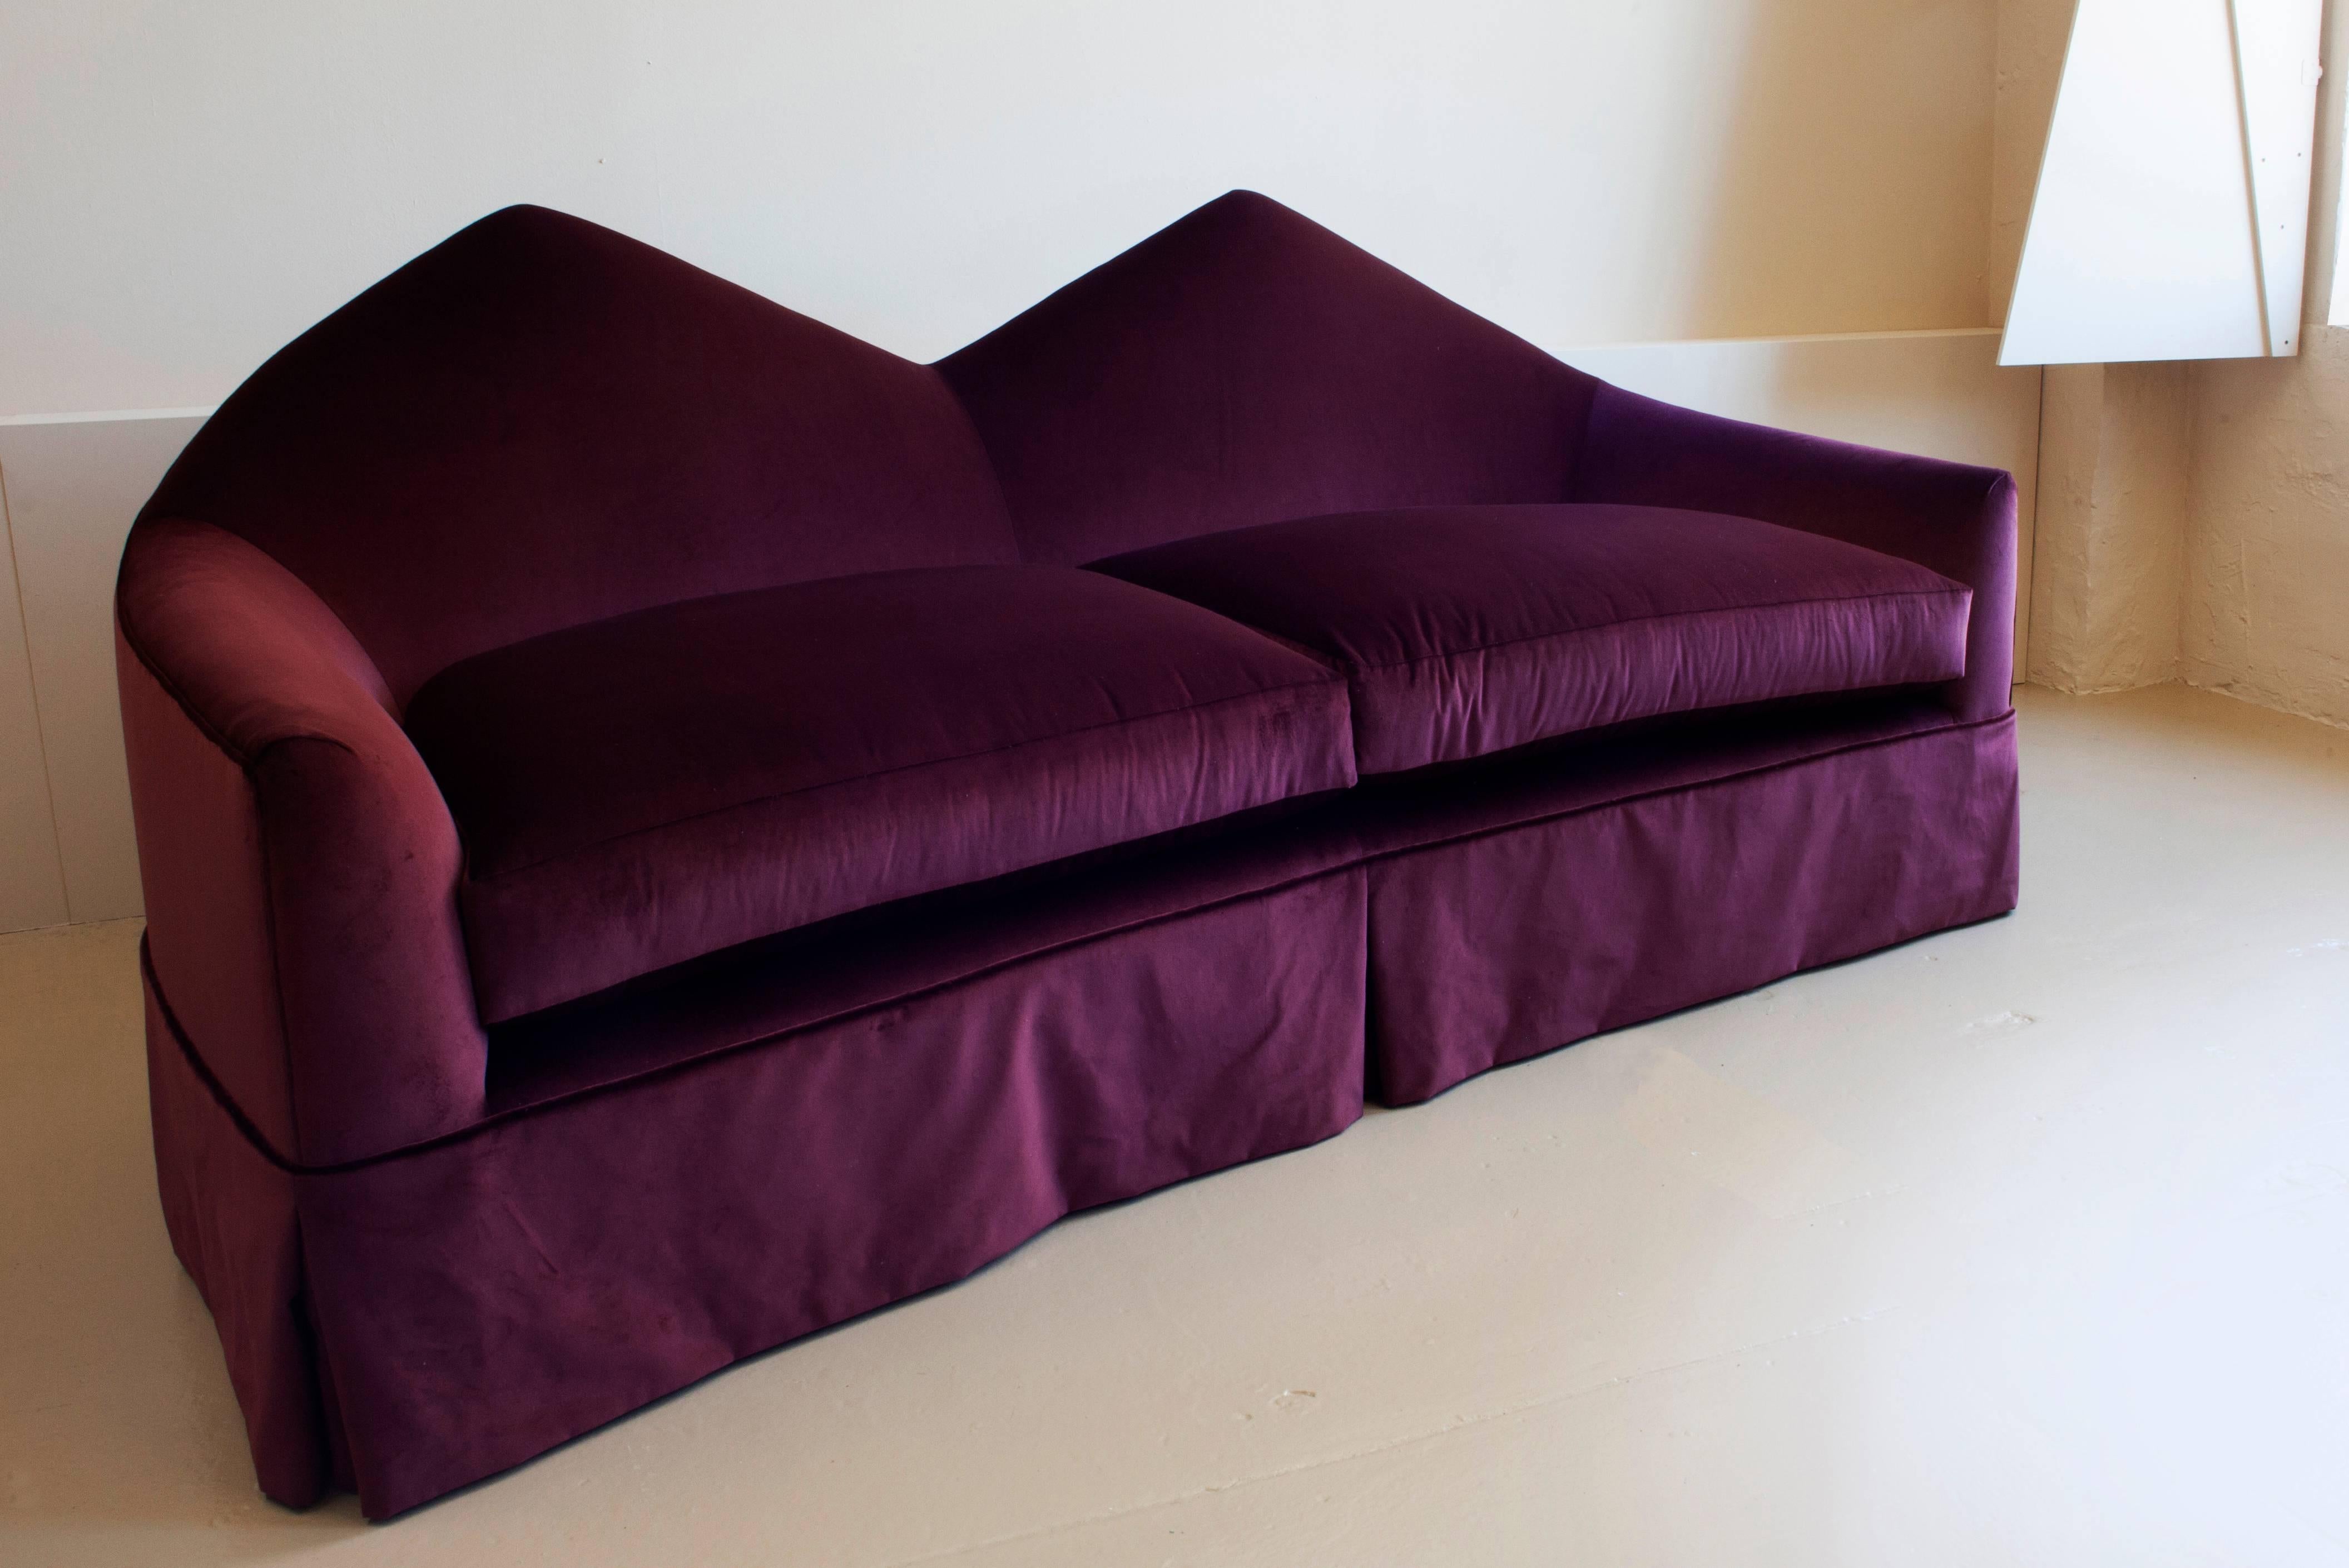 Post-Modern Contemporary 'Twin Peak' Sofa by Material Lust, 2016 For Sale